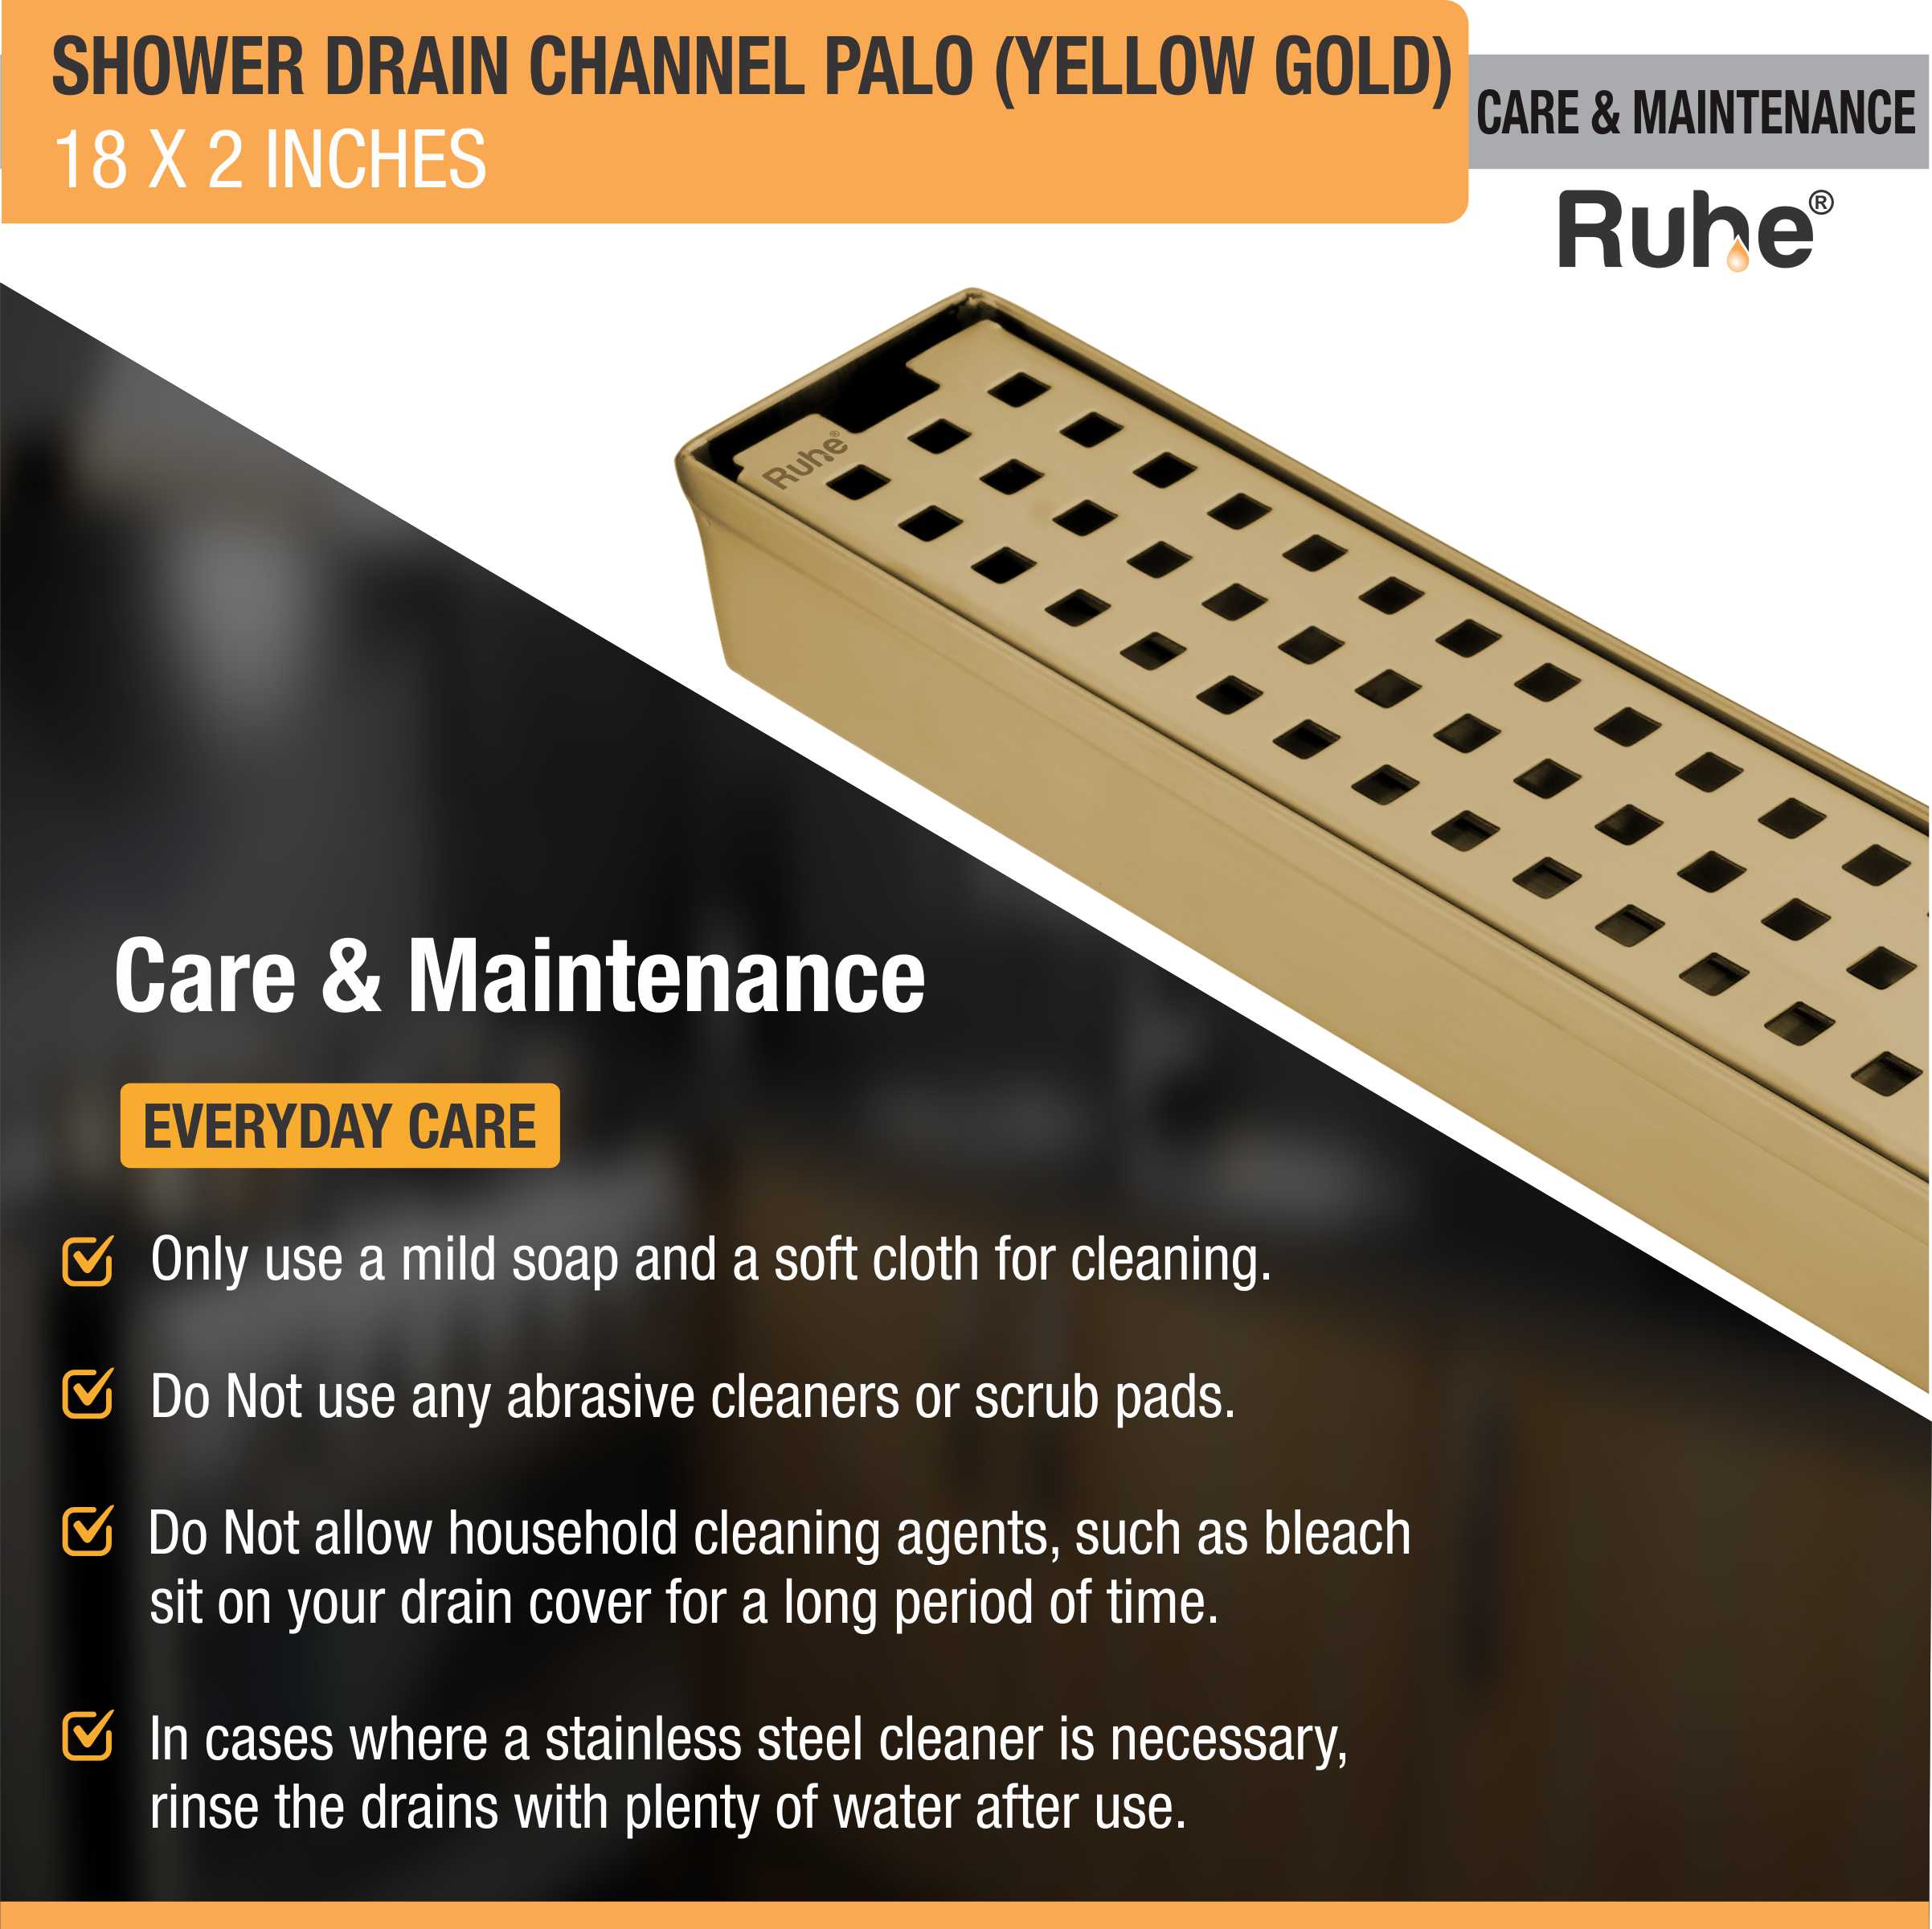 Palo Shower Drain Channel (18 x 2 Inches) YELLOW GOLD care and maintenance